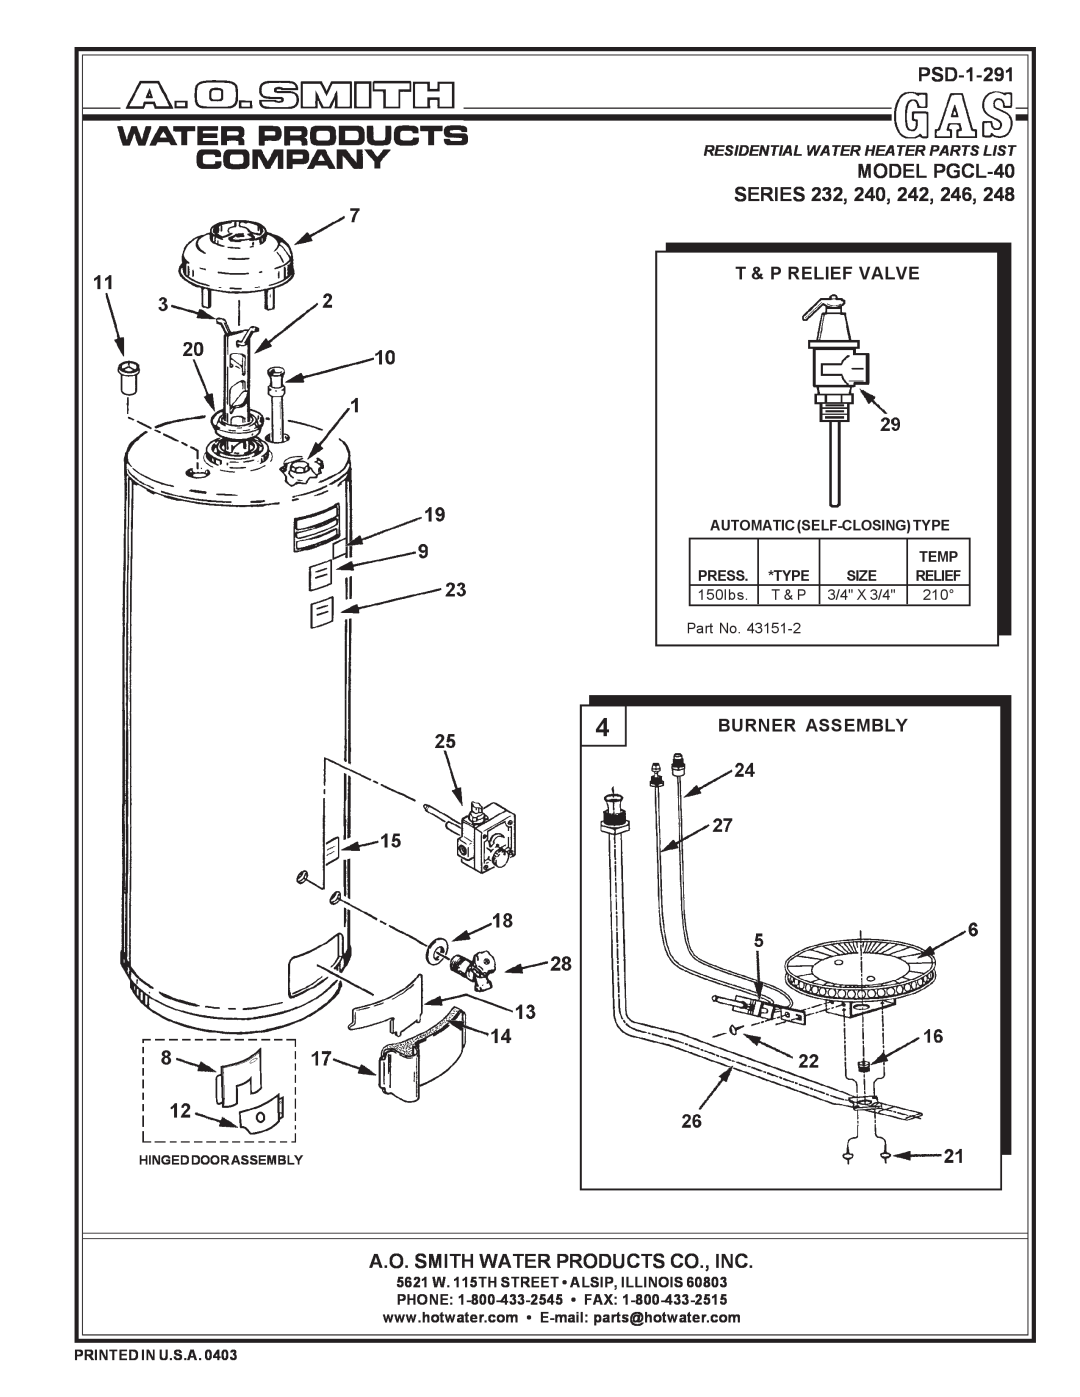 A.O. Smith Series 242 manual PSD-1-291, MODEL PGCL-40 SERIES 232, 240, 242, 246, A.O. Smith Water Products Co., Inc, Temp 